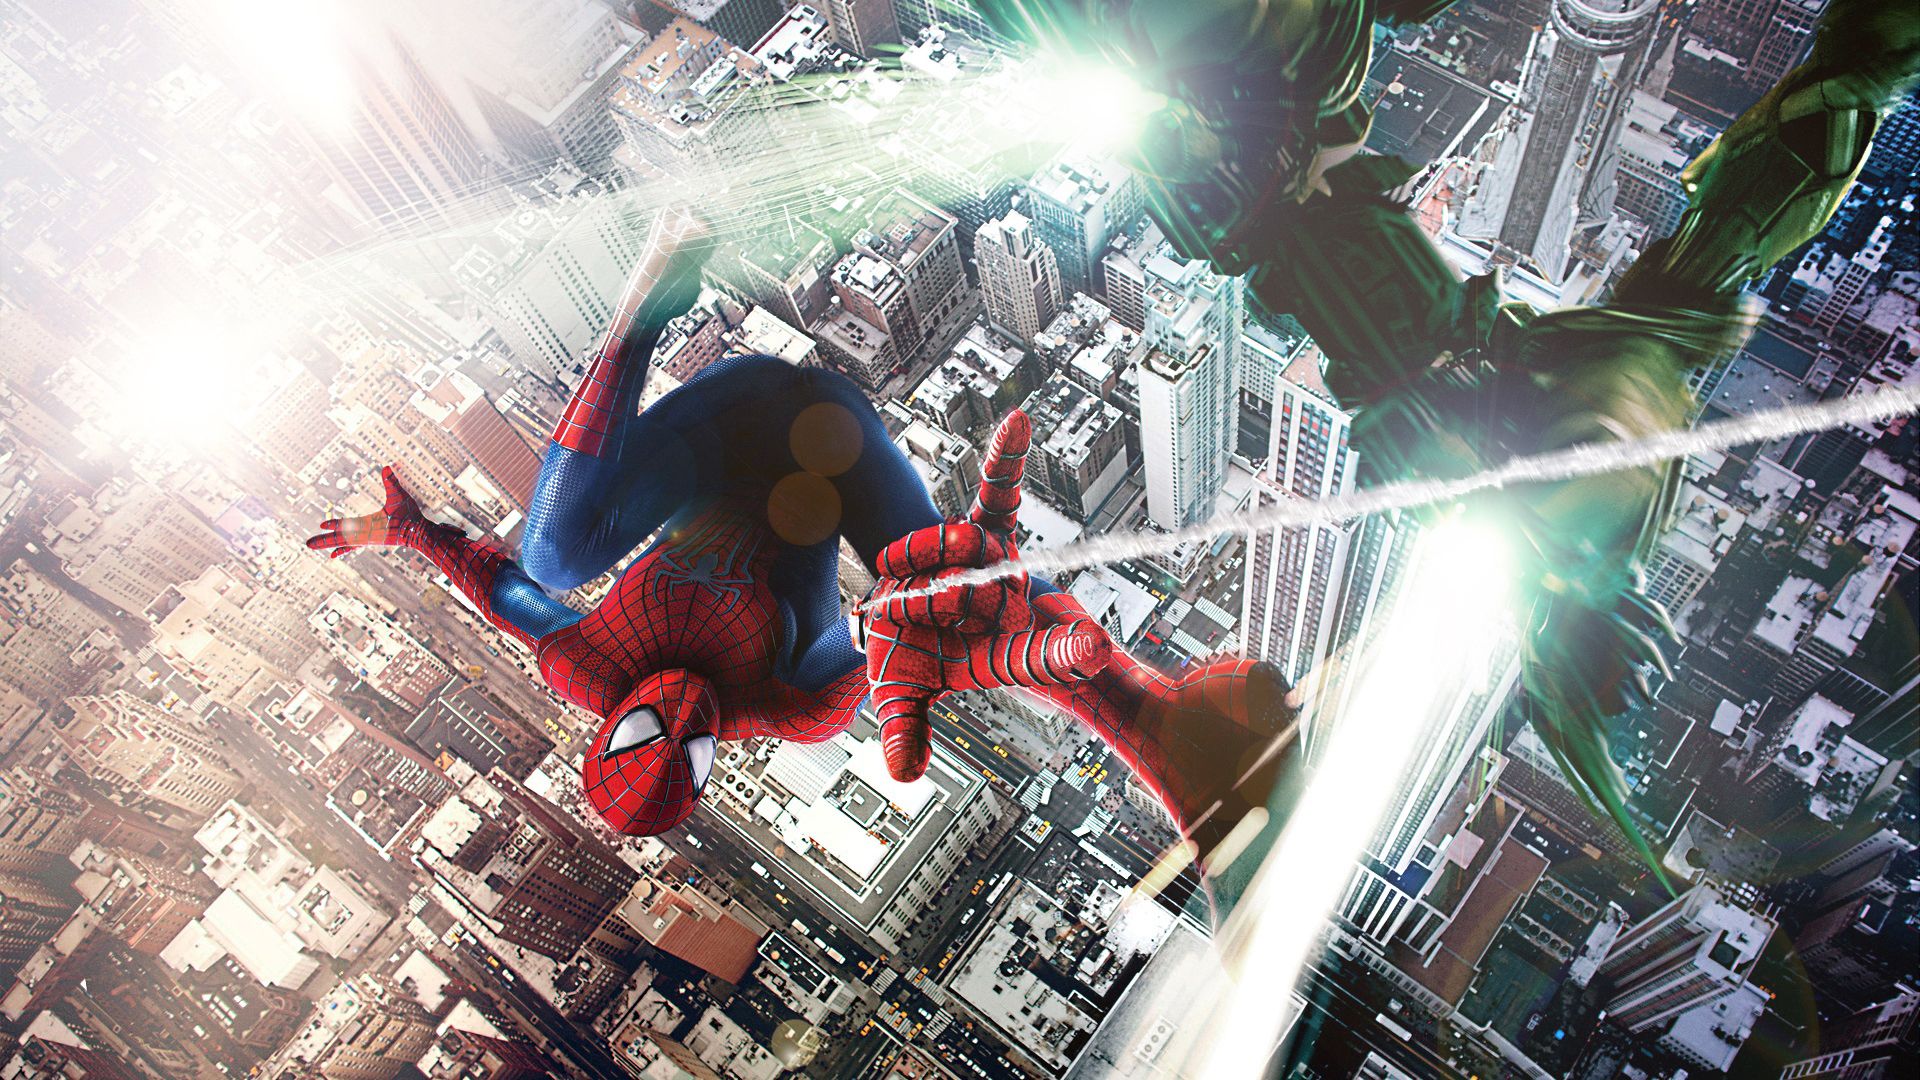 The Amazing Spider-Man 2 Movie Poster Wallpaper #3 by ...